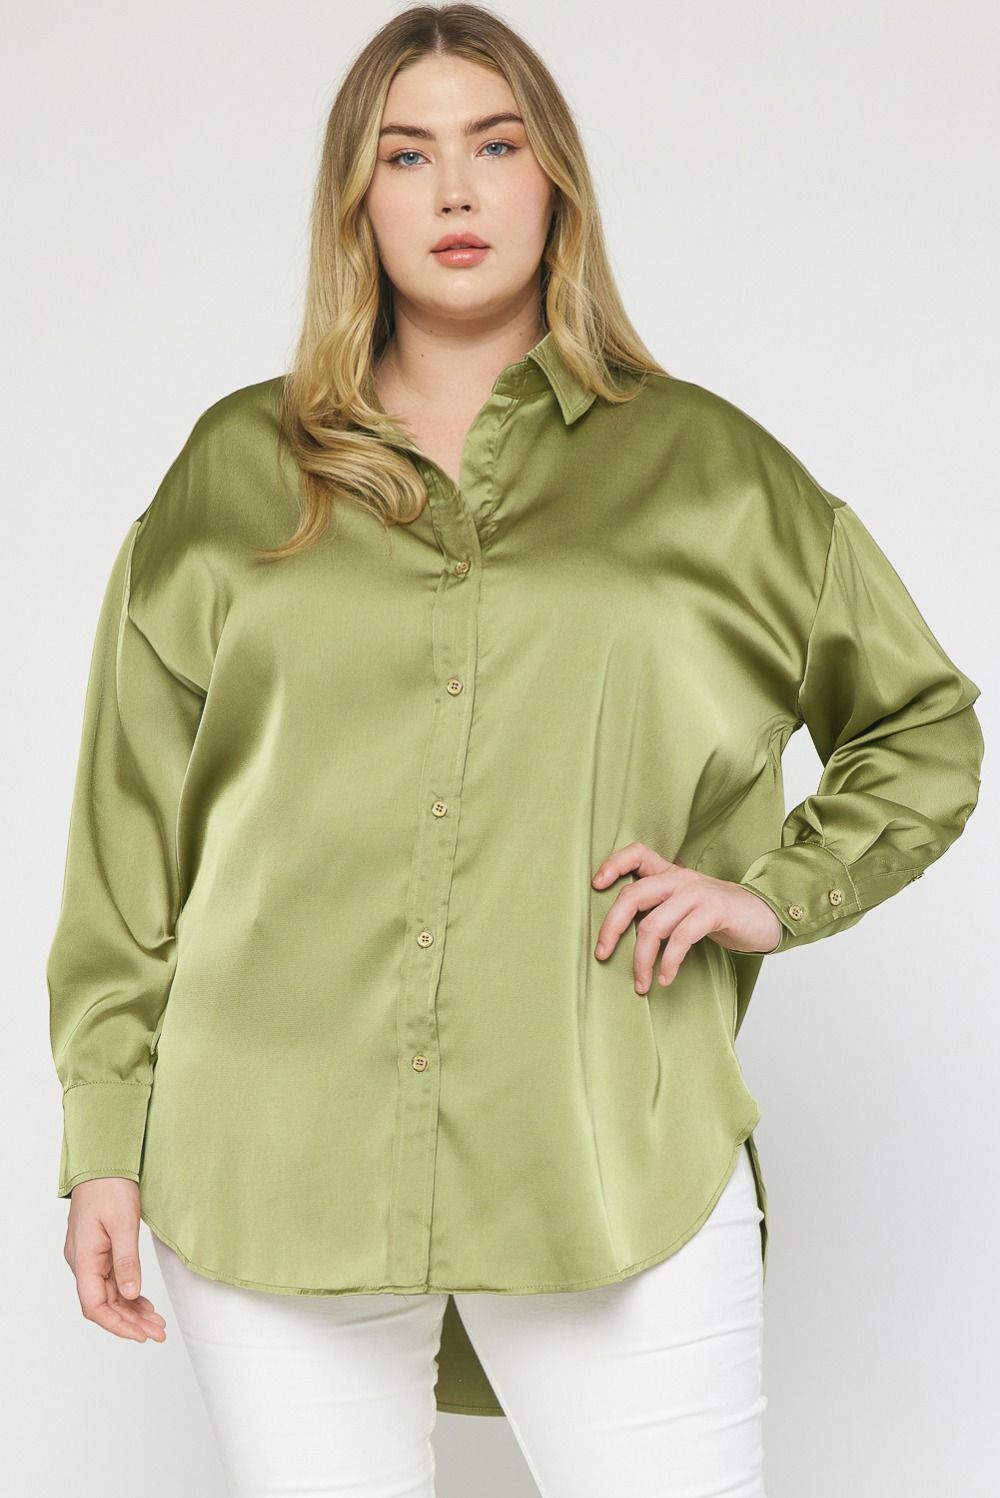 Satin Button Up Collared Top